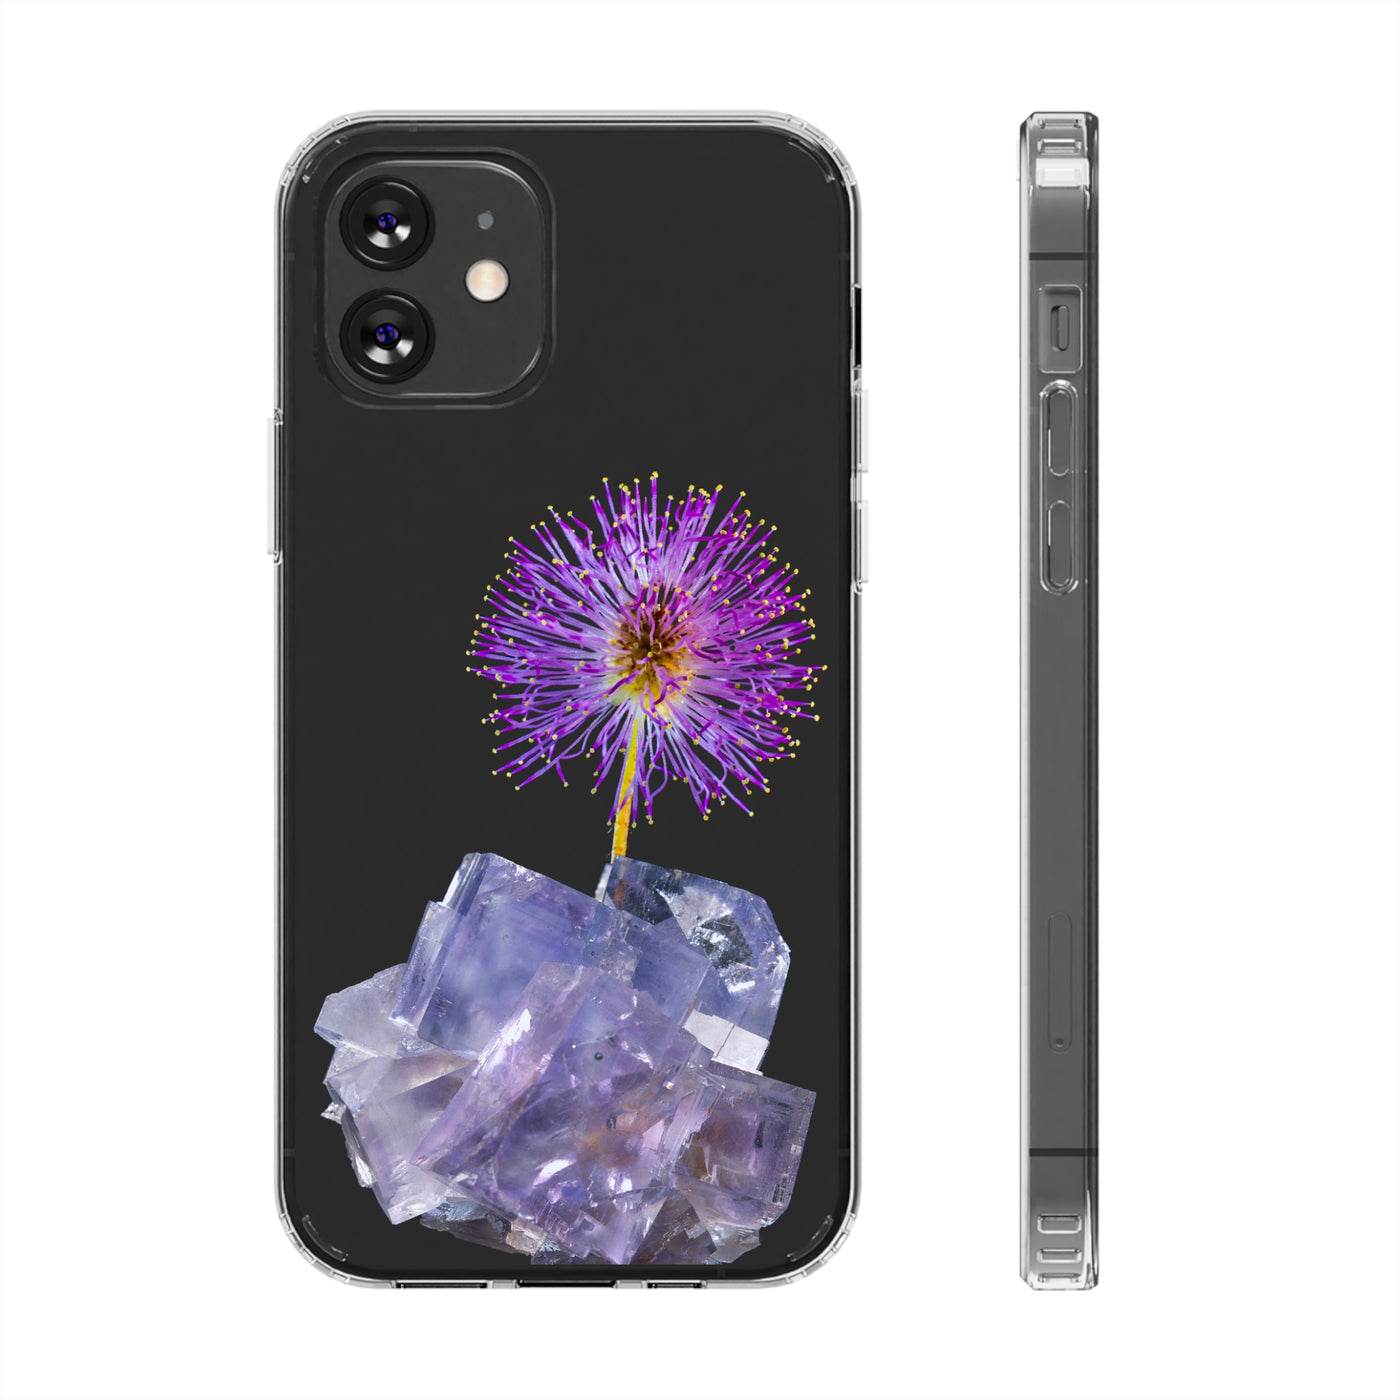 Crystal Clear Phone Case with Plants, Flowers, and Crystals | Durable, Slim, and Protective | IPhone & Android